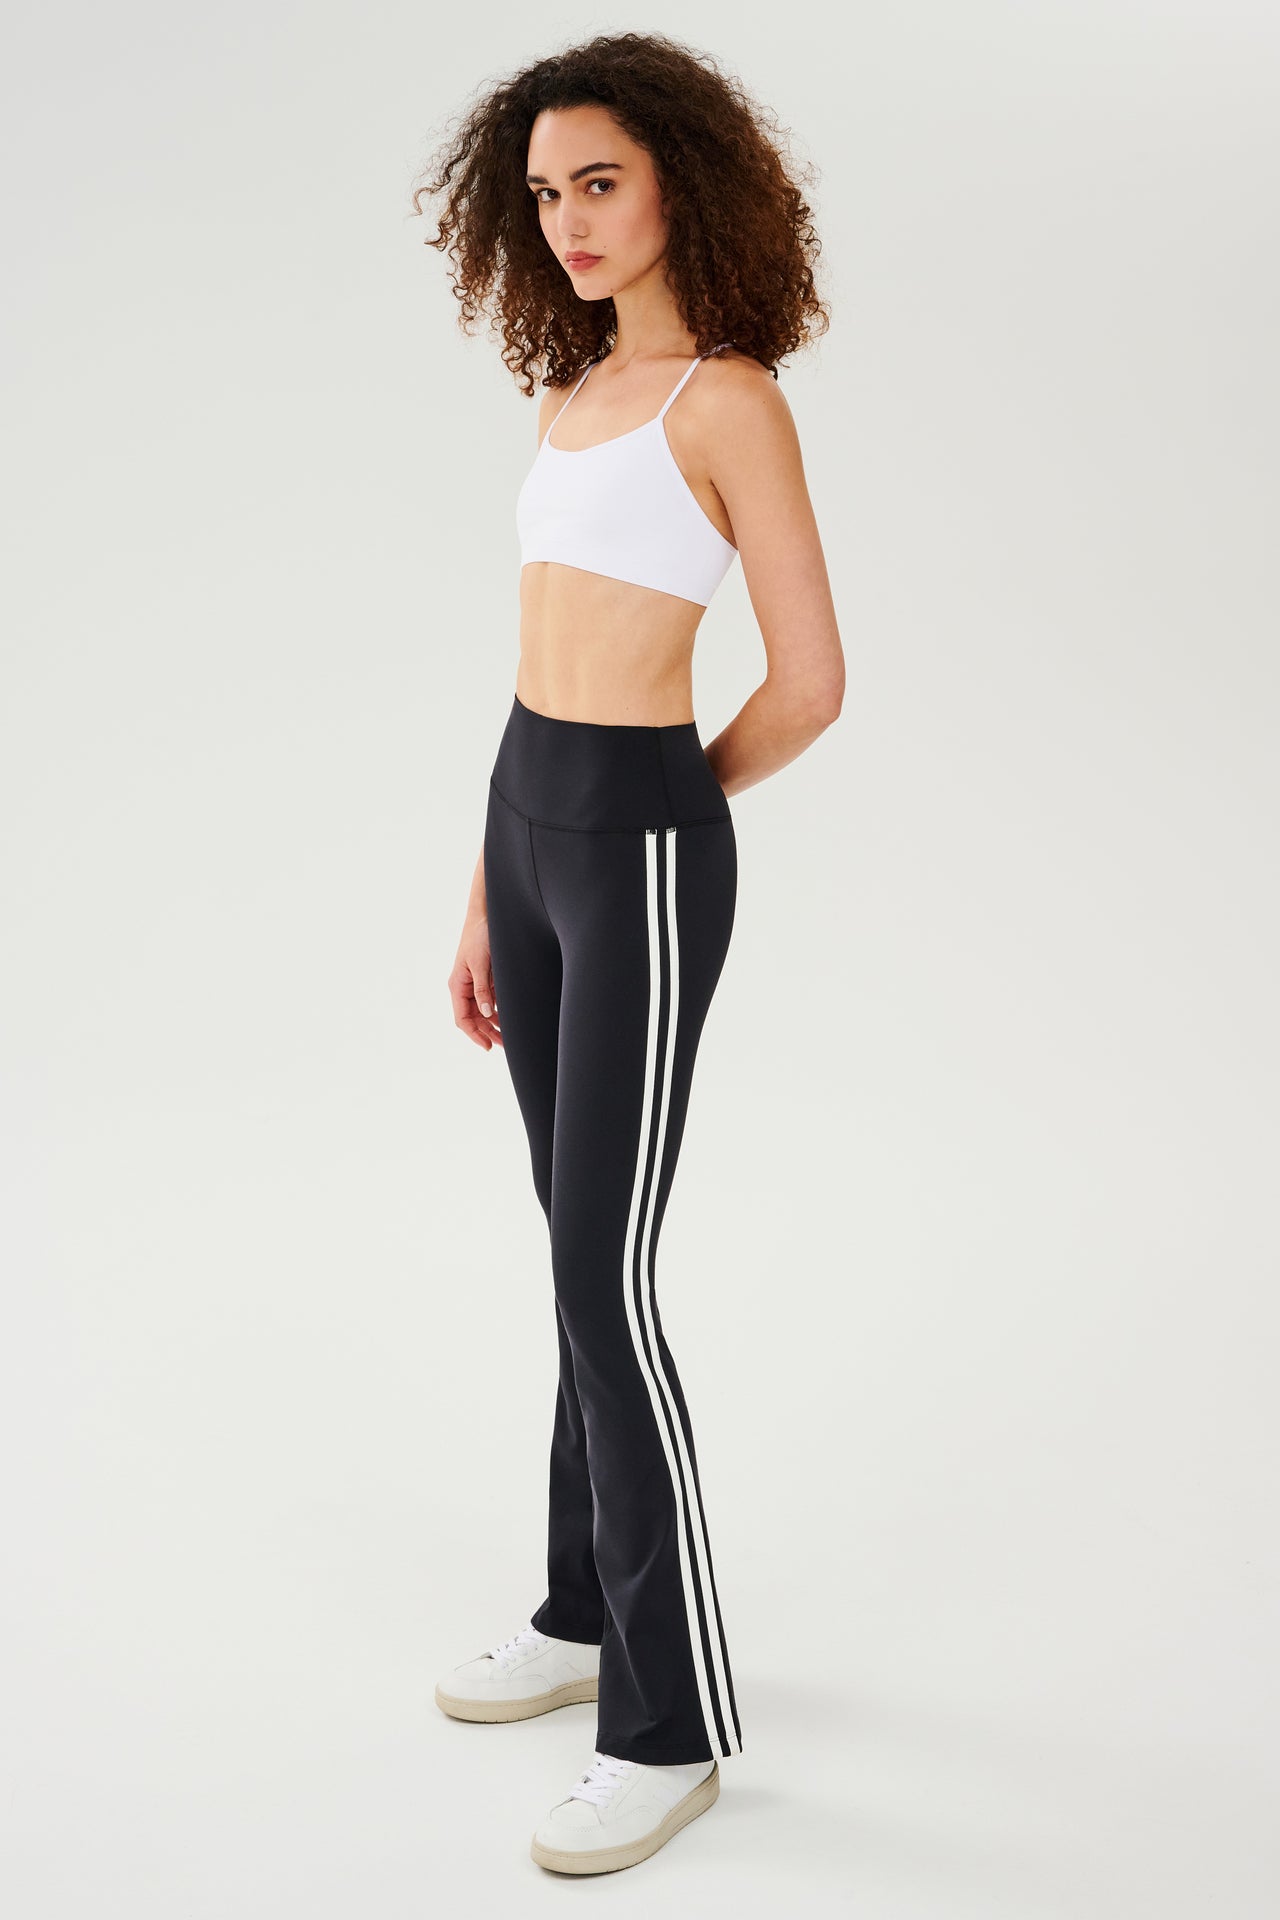 Full front side view of woman with dark curly hair wearing black high waist below ankle length legging with wide flared bottoms with double white side stripes on both legs. Also wearing a white racerback bra with spaghetti straps. Paired with white shoes.